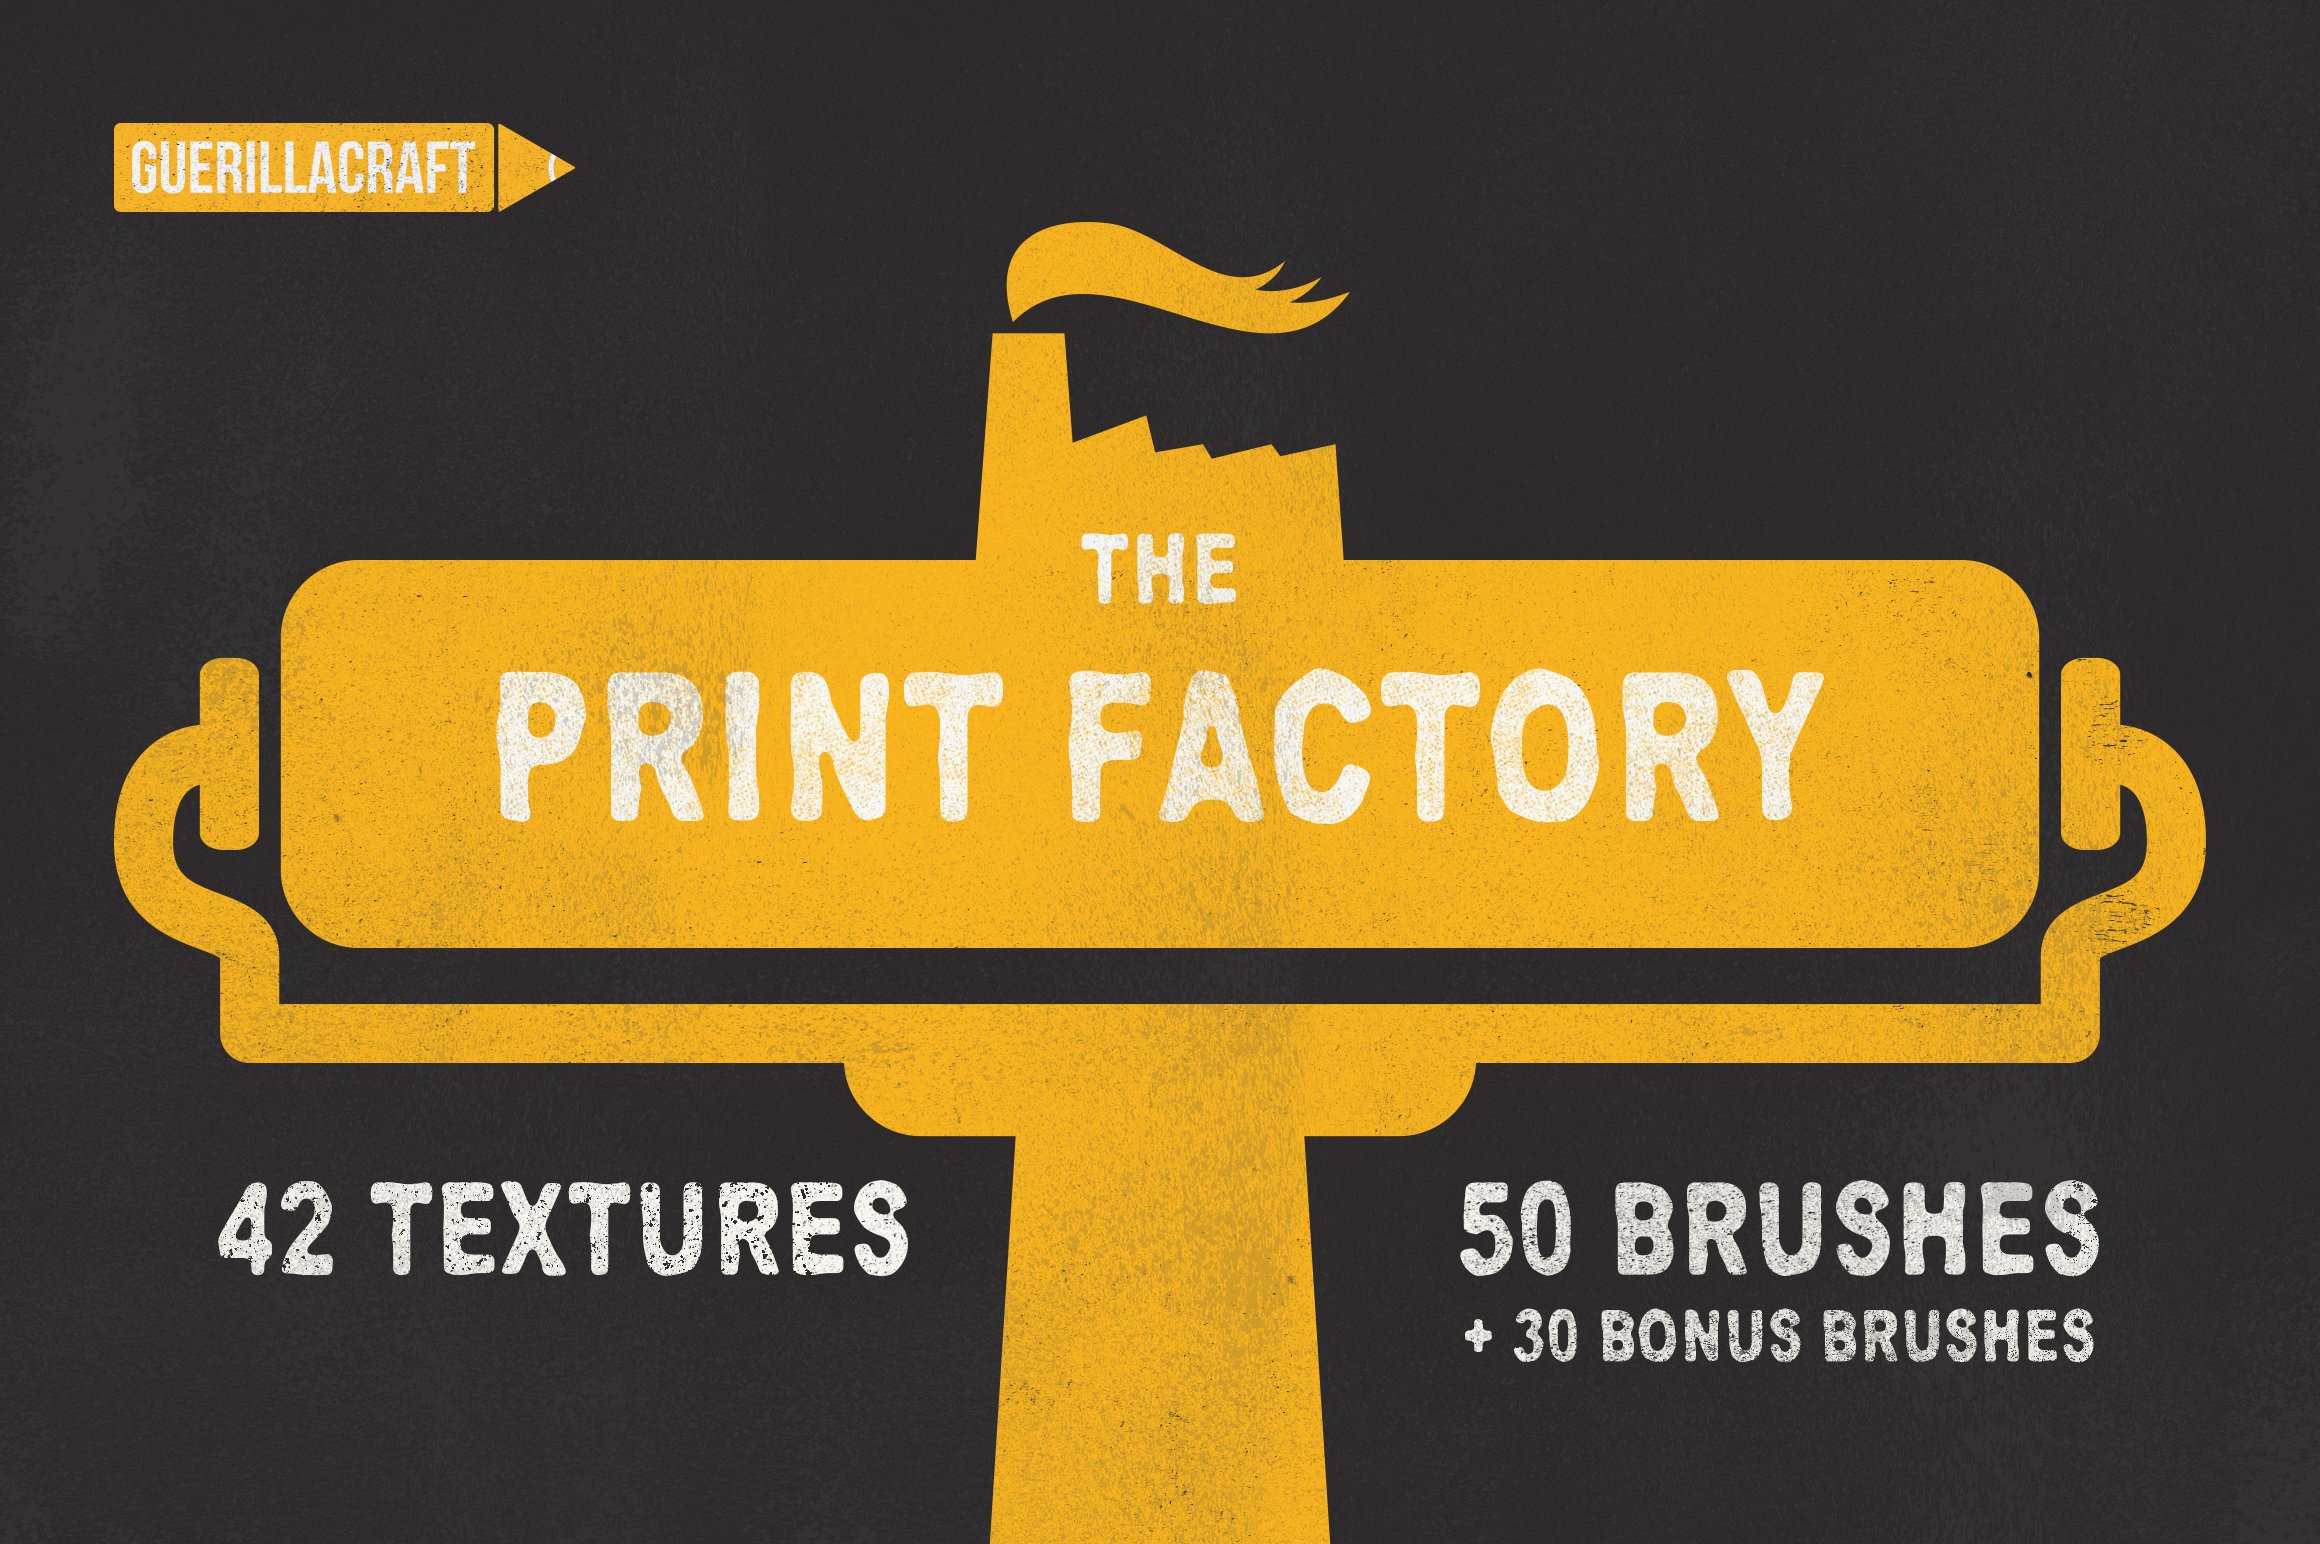 The Print Factory - Textures and Brushes